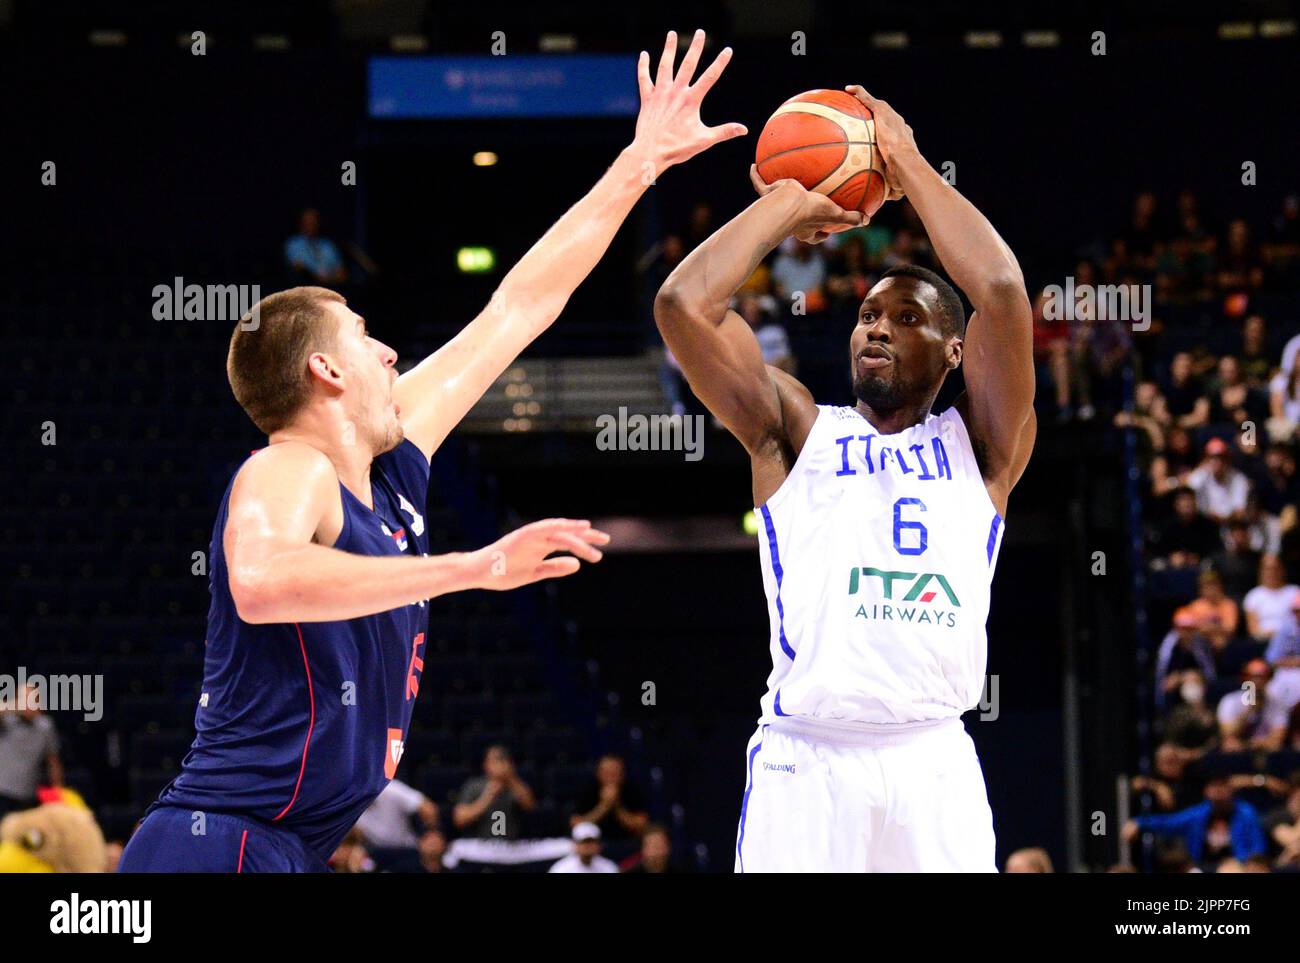 Hamburg, Germany. 19th Aug, 2022. Basketball; Supercup, Italy - Serbia, semifinal, at Barclaycard Arena. Serbia's Nikola Jokic (l) and Italy's Paul Biligha fight for the ball. Credit: Daniel Bockwoldt/dpa/Alamy Live News Stock Photo